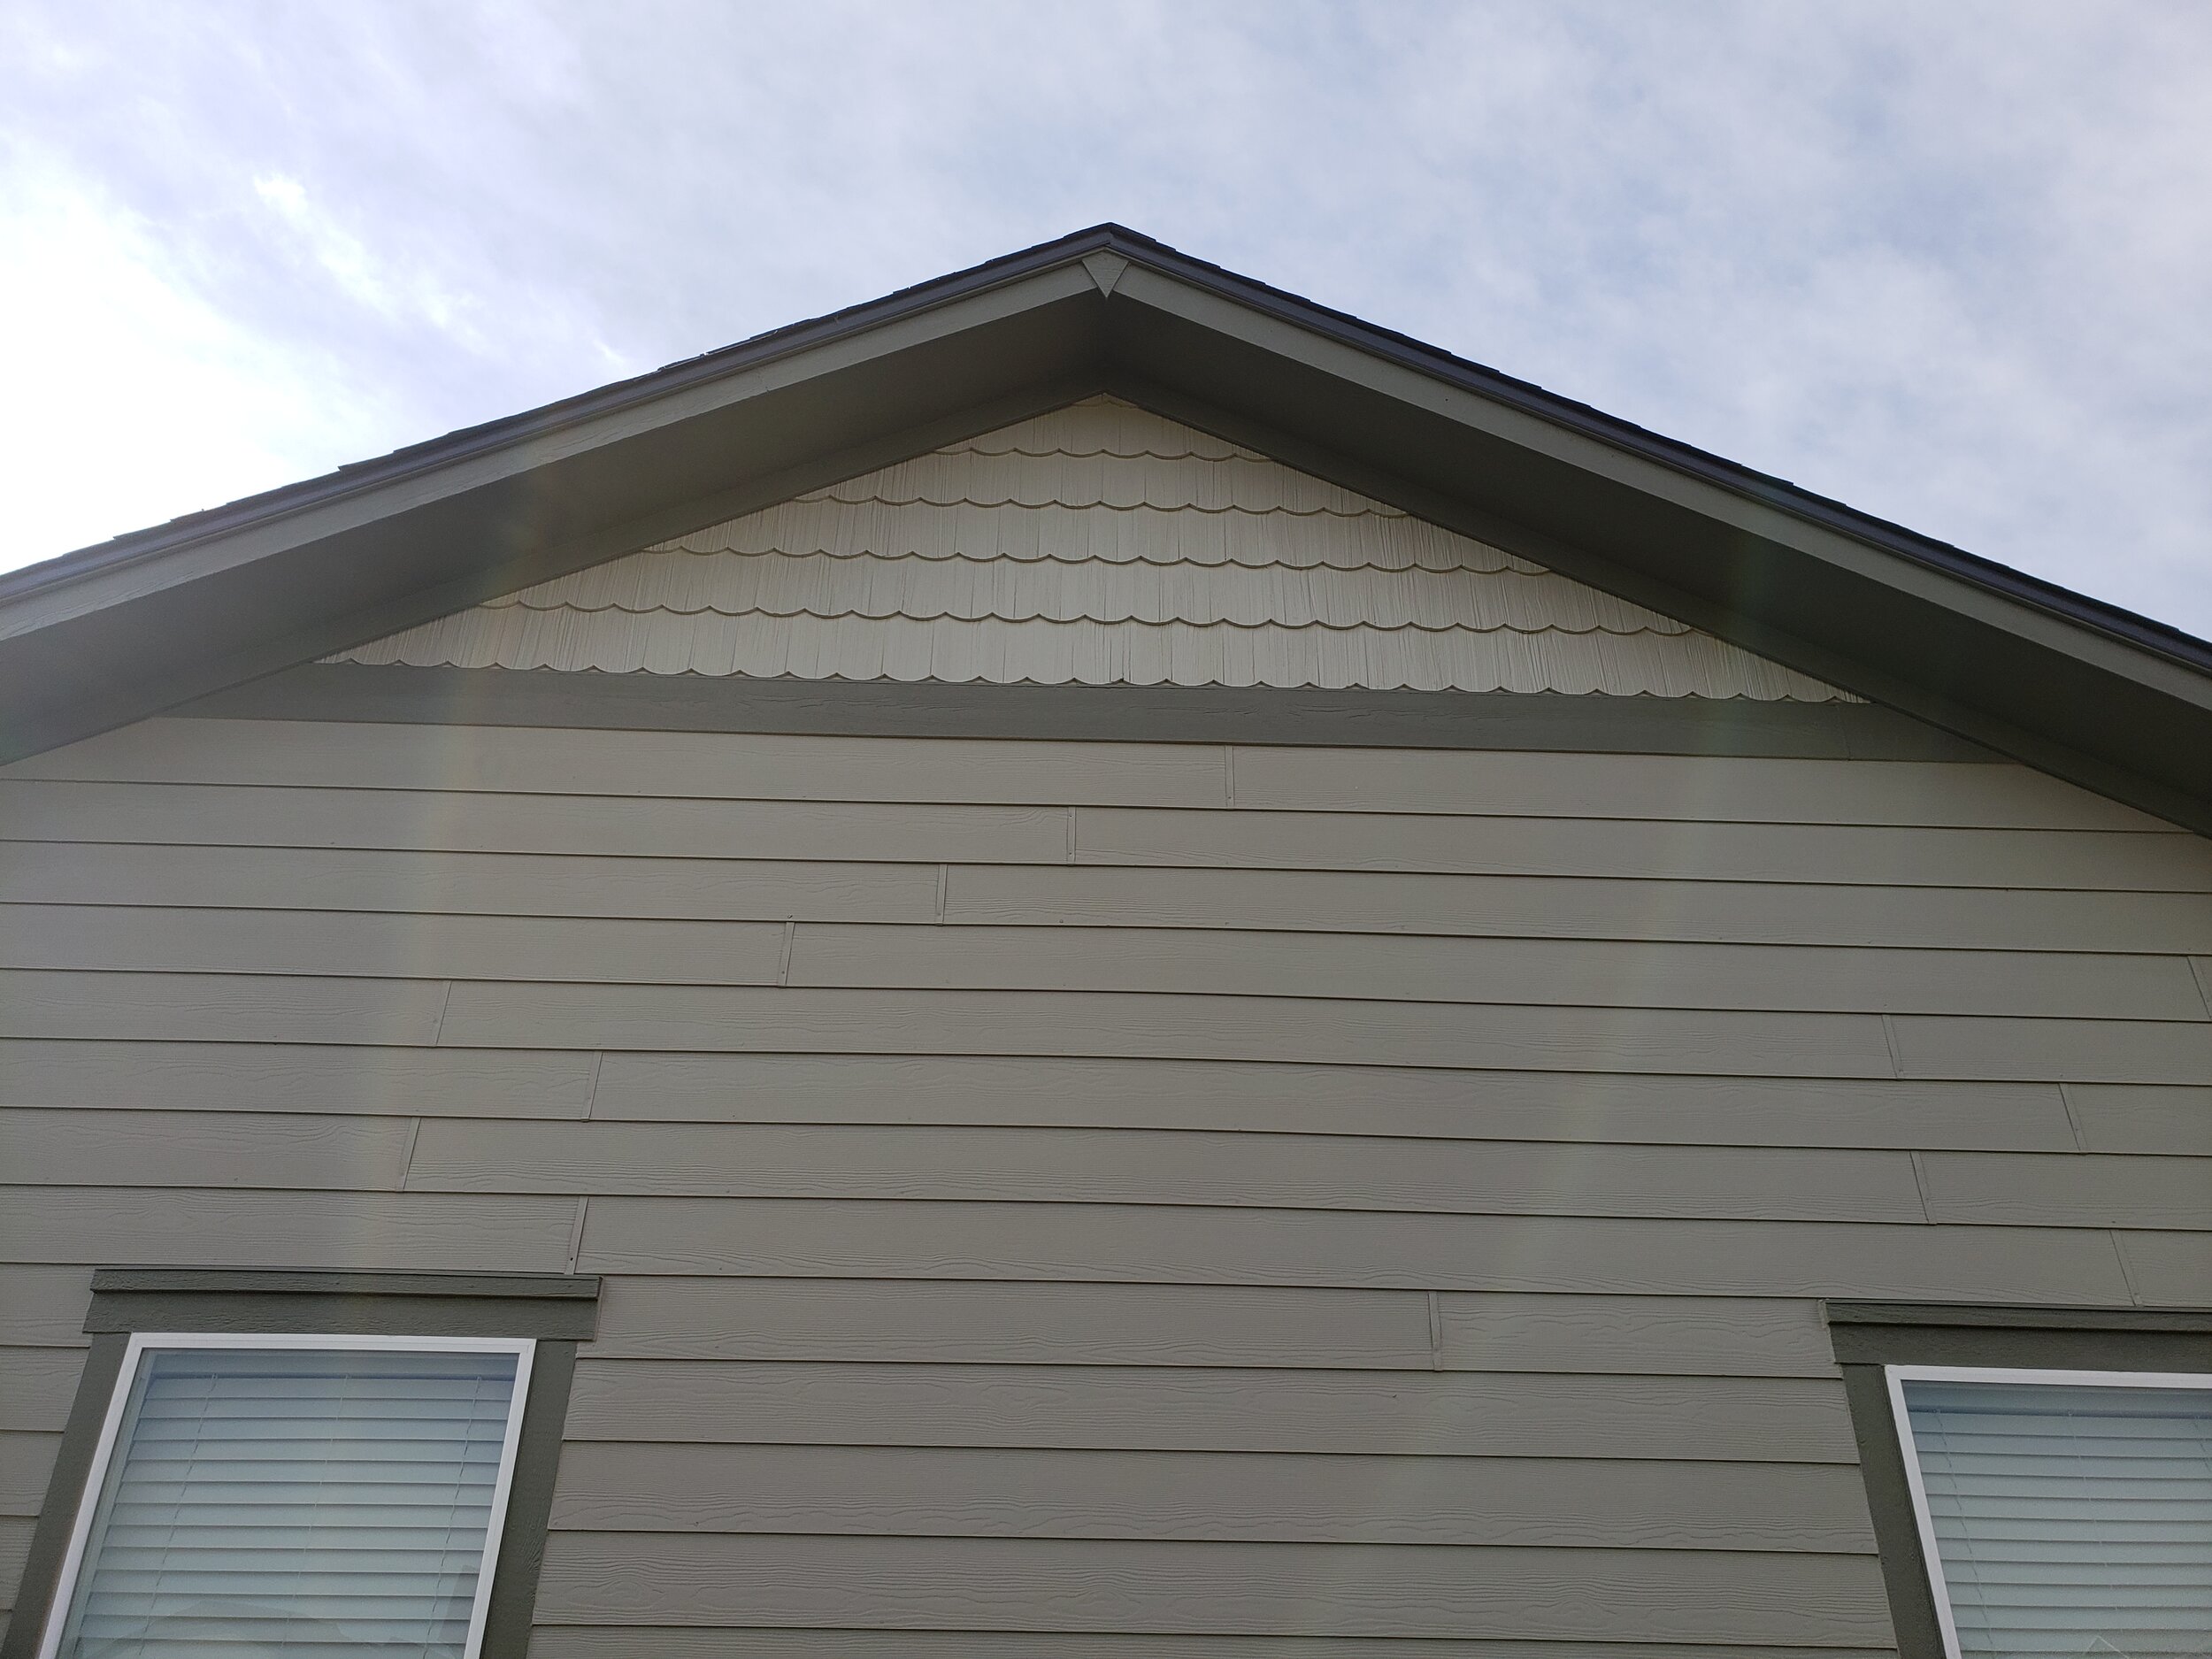 Low-angle shot of a home roofline with dark siding